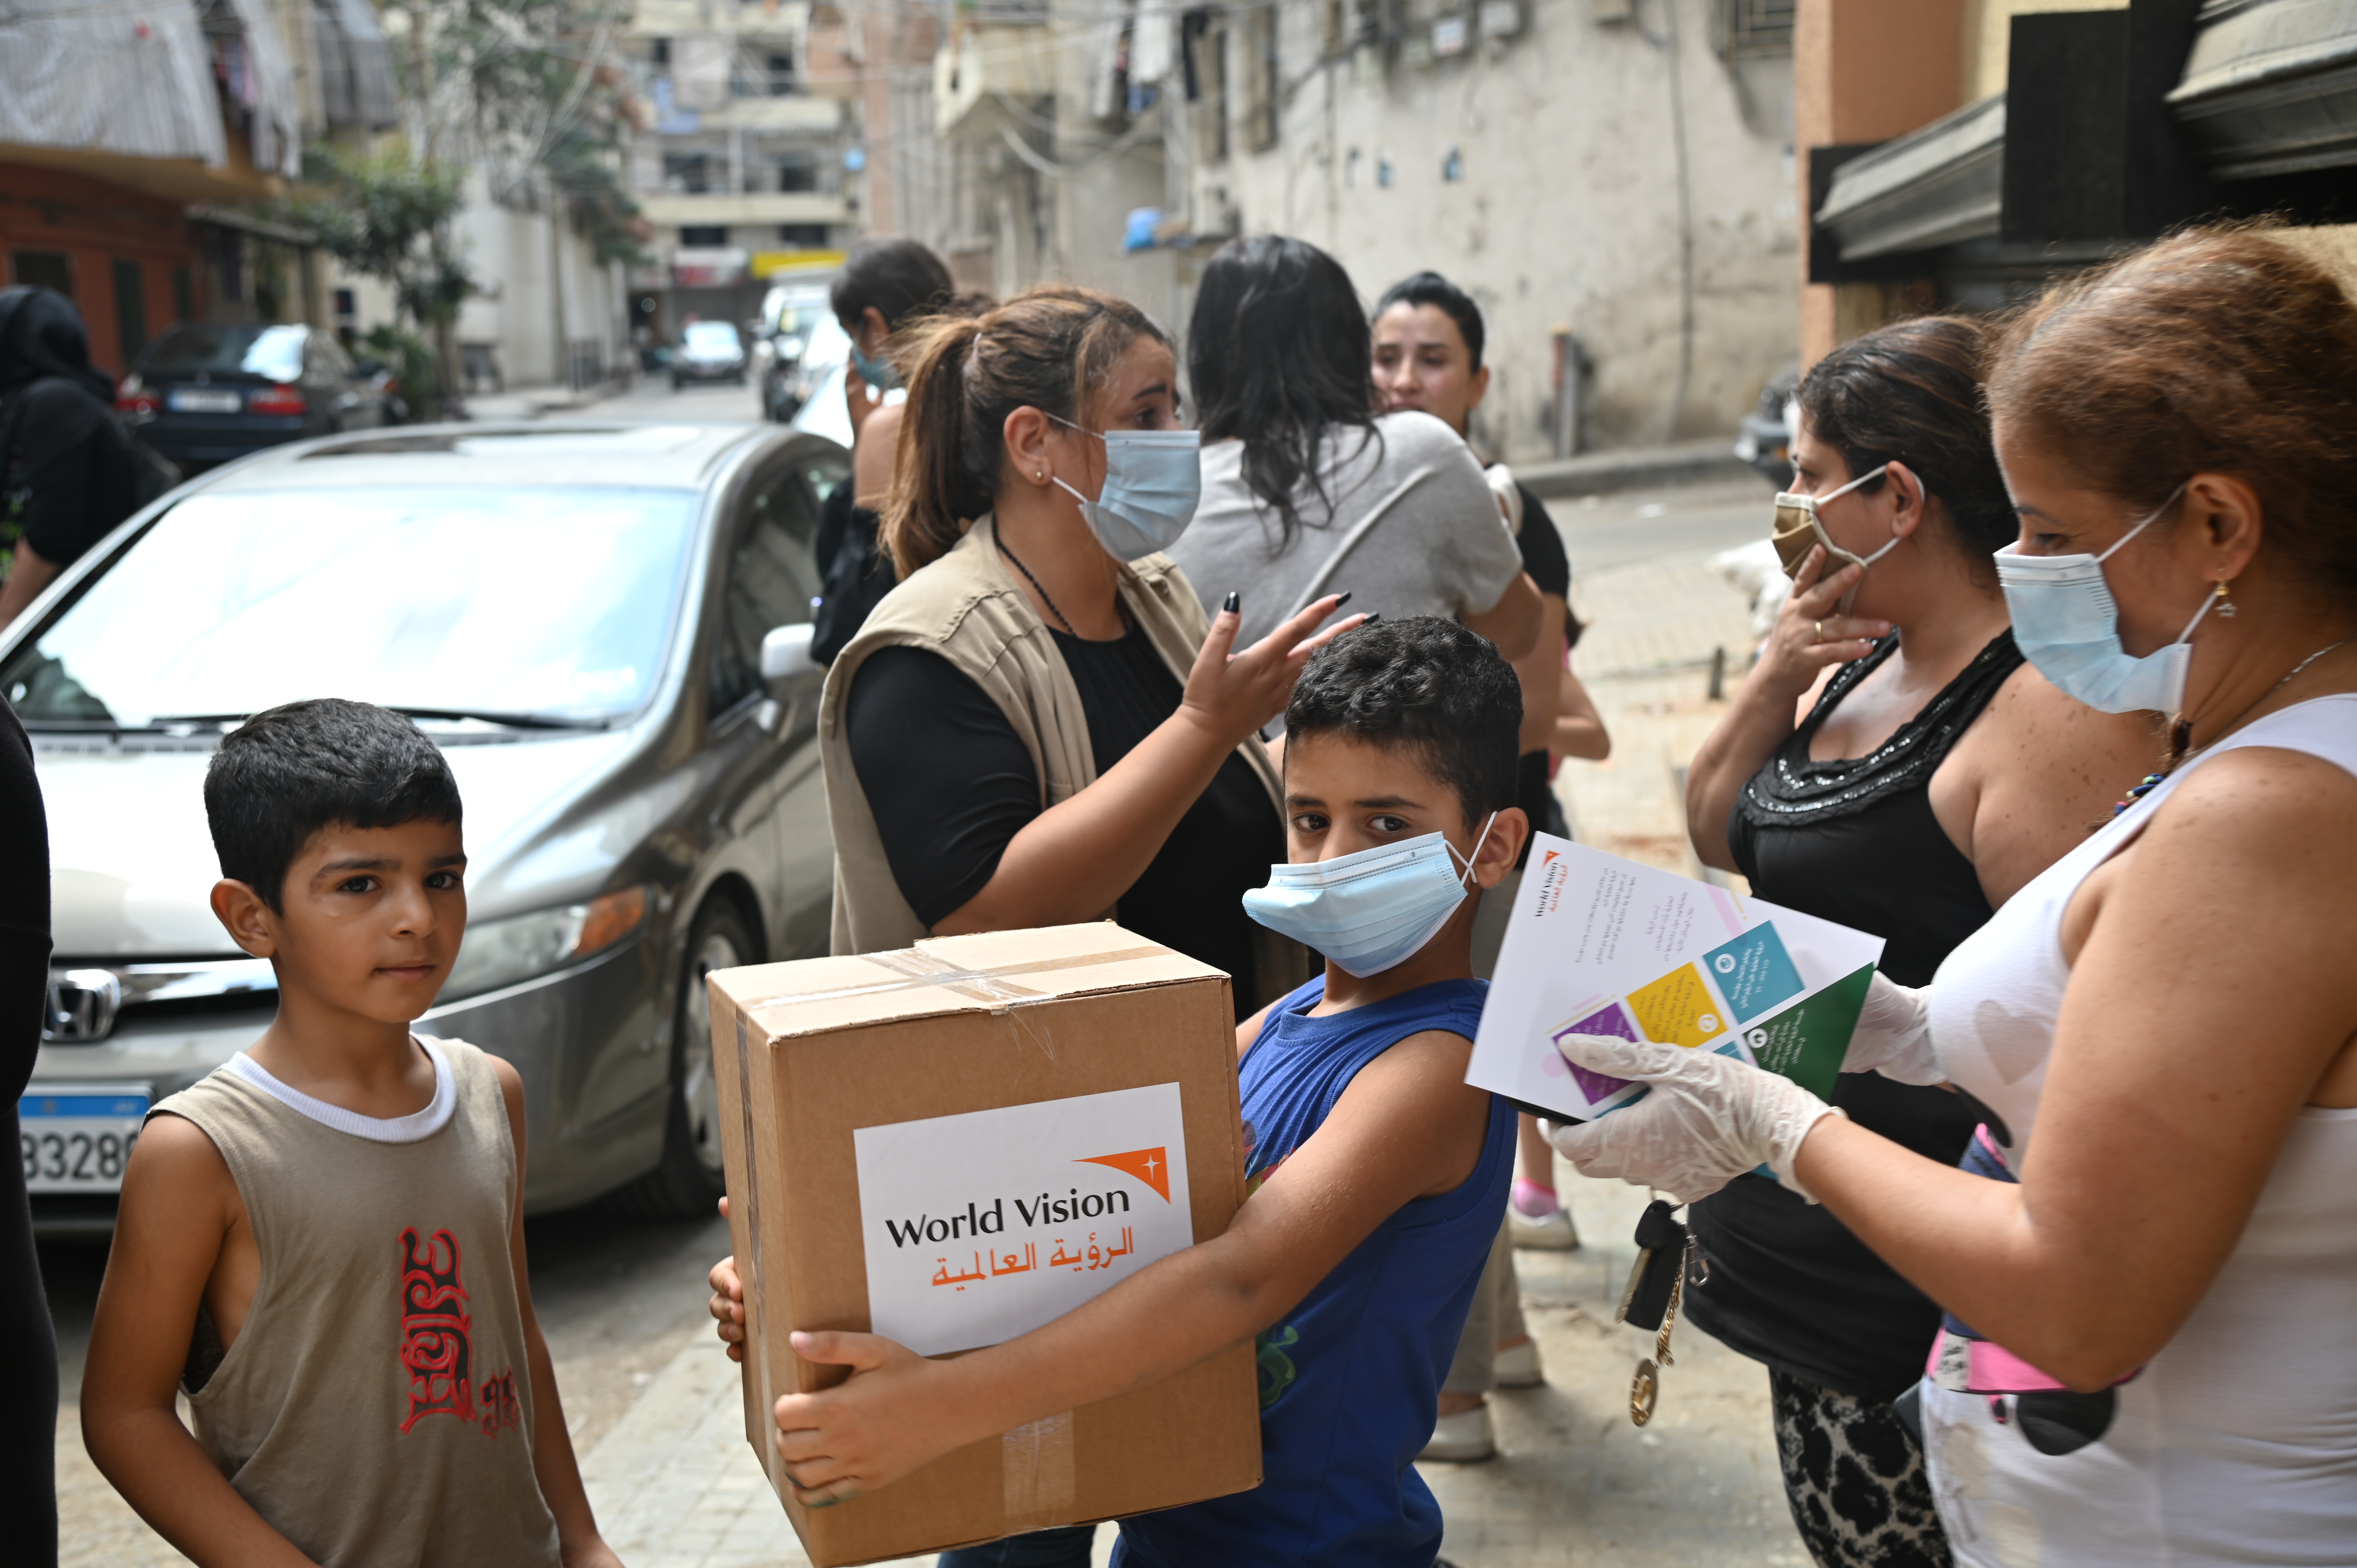 Children in Lebanon hold boxes of aid handed out in the wake of the Beirut explosion